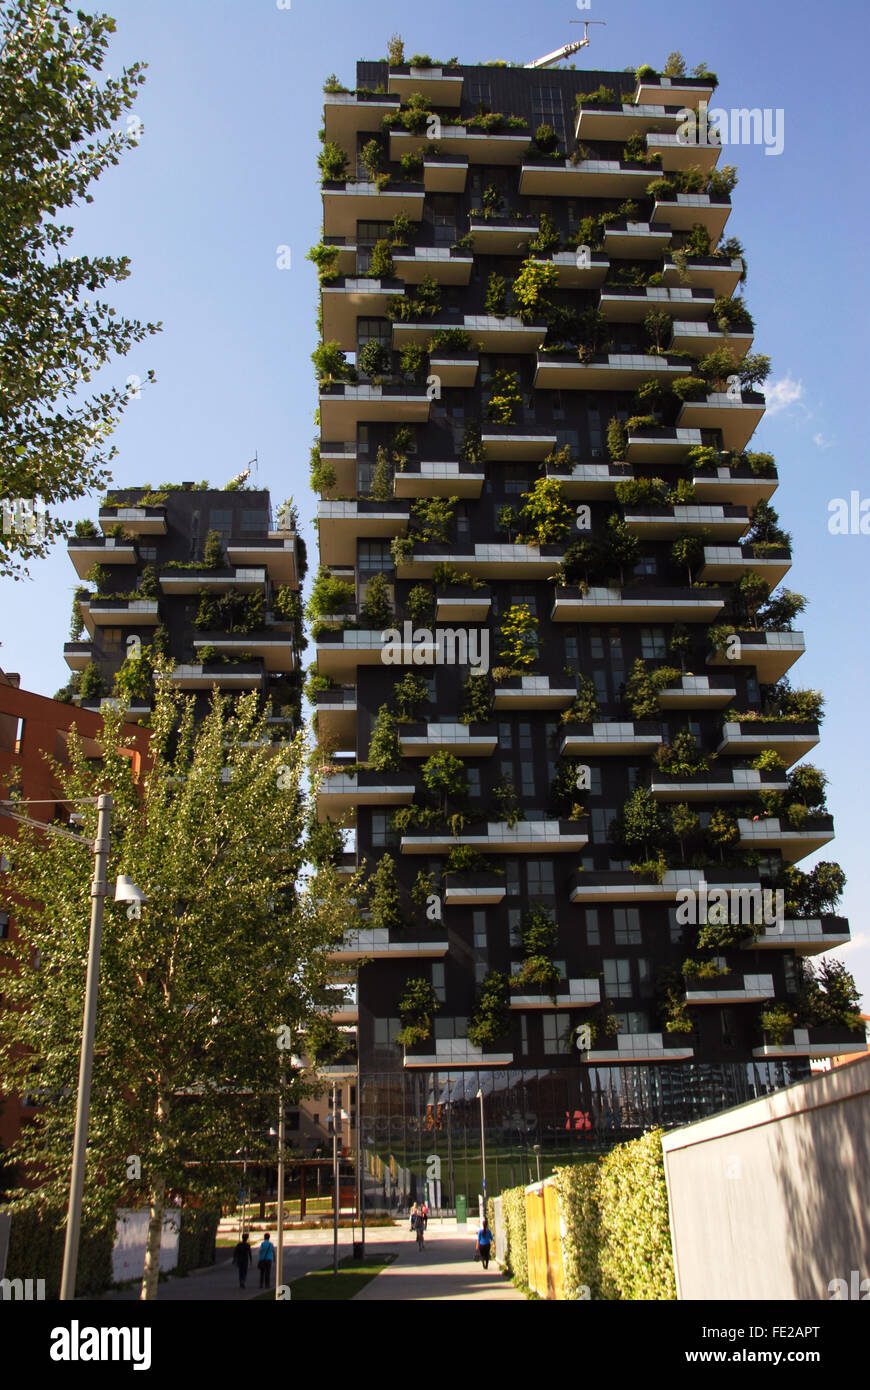 Bosco Verticale (Vertical Forest) designed by architect Stefano Boeri , a pair of residential towers in the new Porta Nuova dist Stock Photo